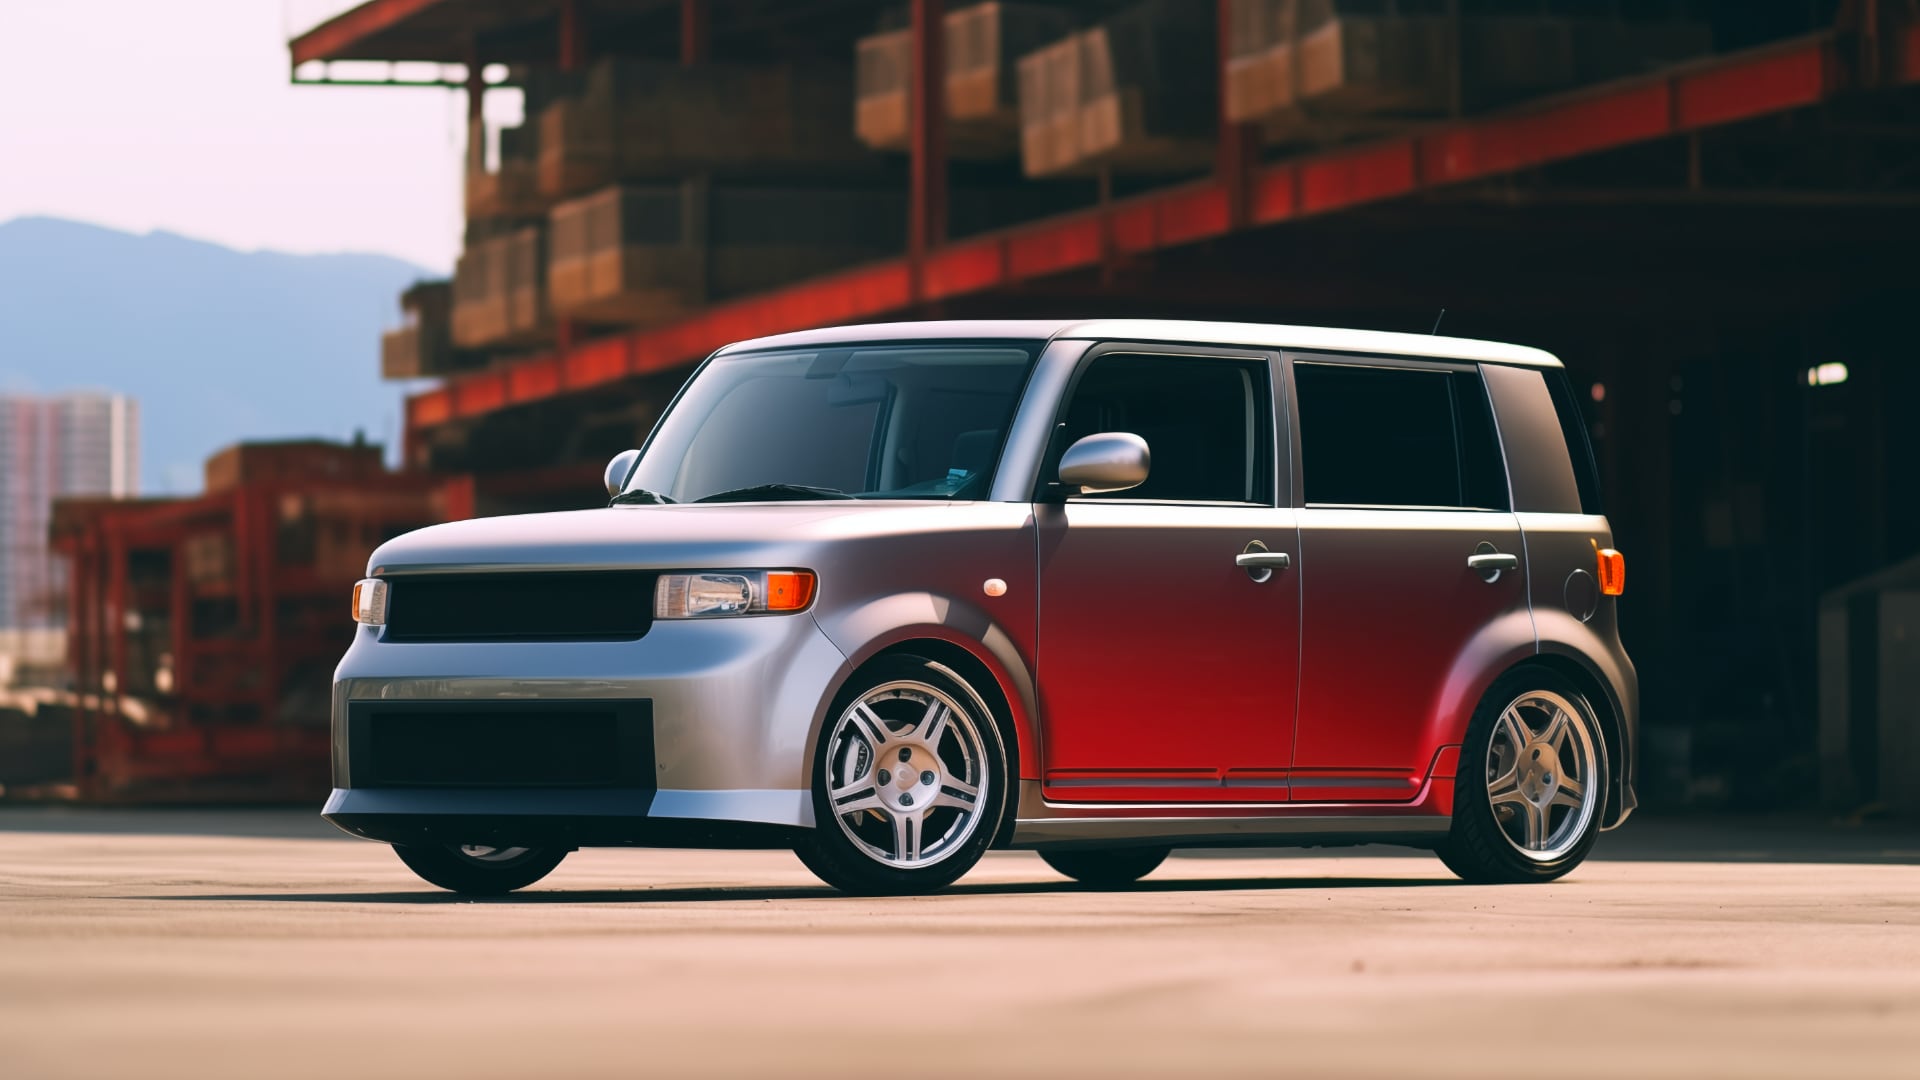 A red Scion xB is parked in front of a building.